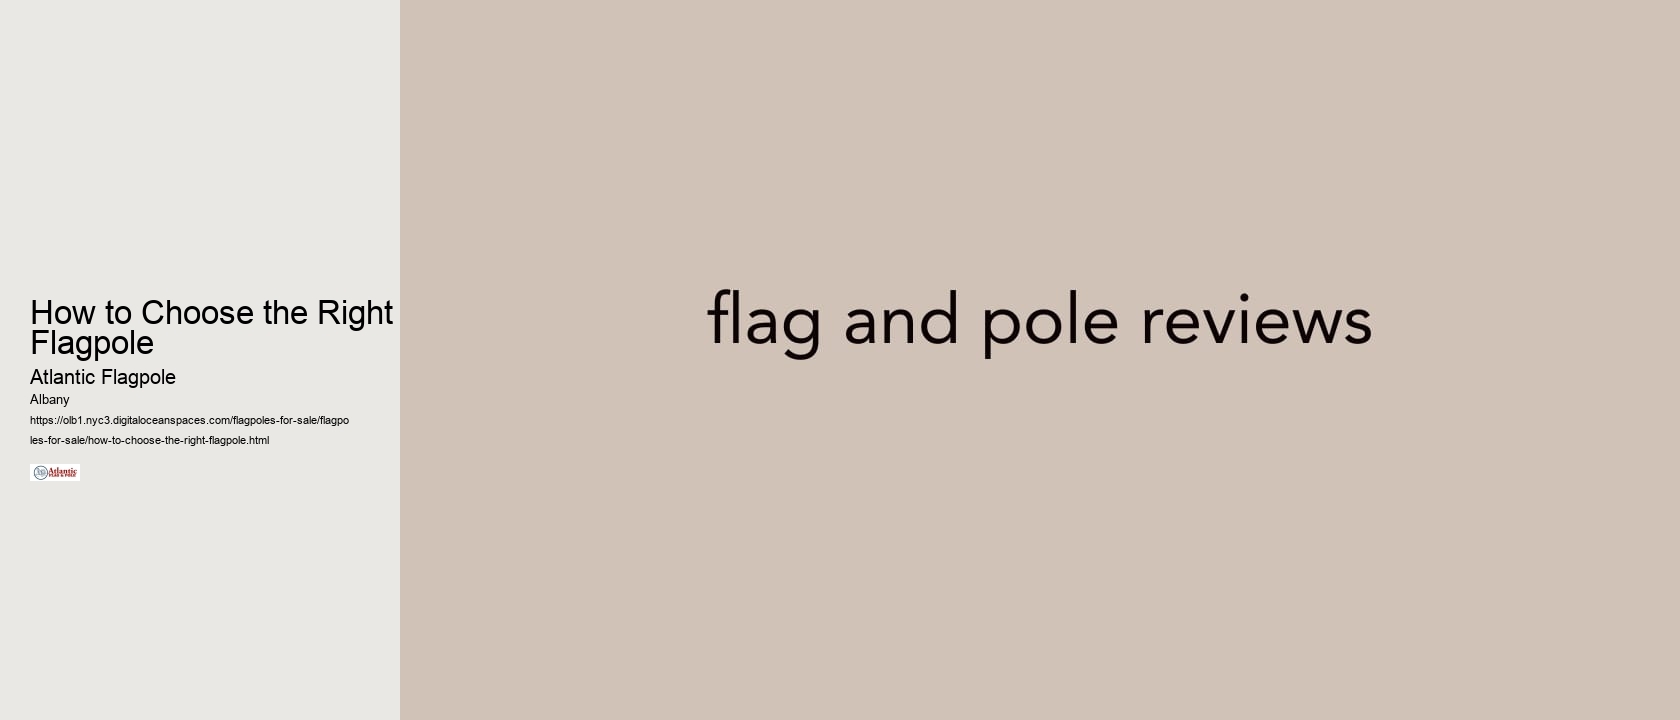 How to Choose the Right Flagpole